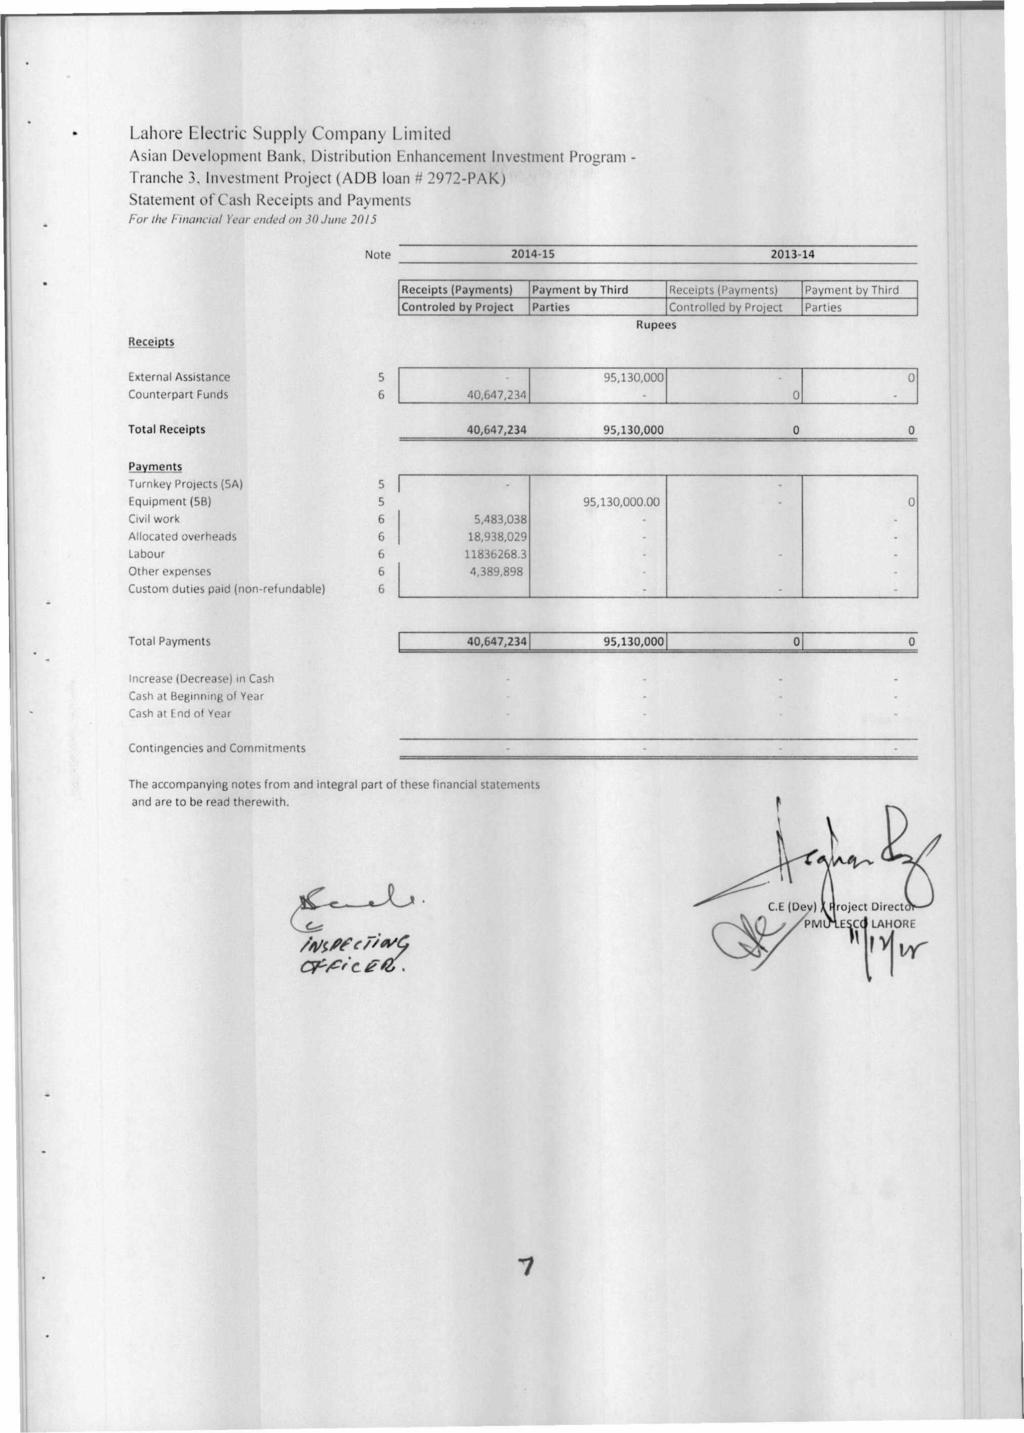 Lahore Electric Supply Company Limited Asian Development Bank, Distribution Enhancement Investment Program - Tranche 3, Investment Project (ADB loan # 2972-PAK) Statement of Cash Receipts and